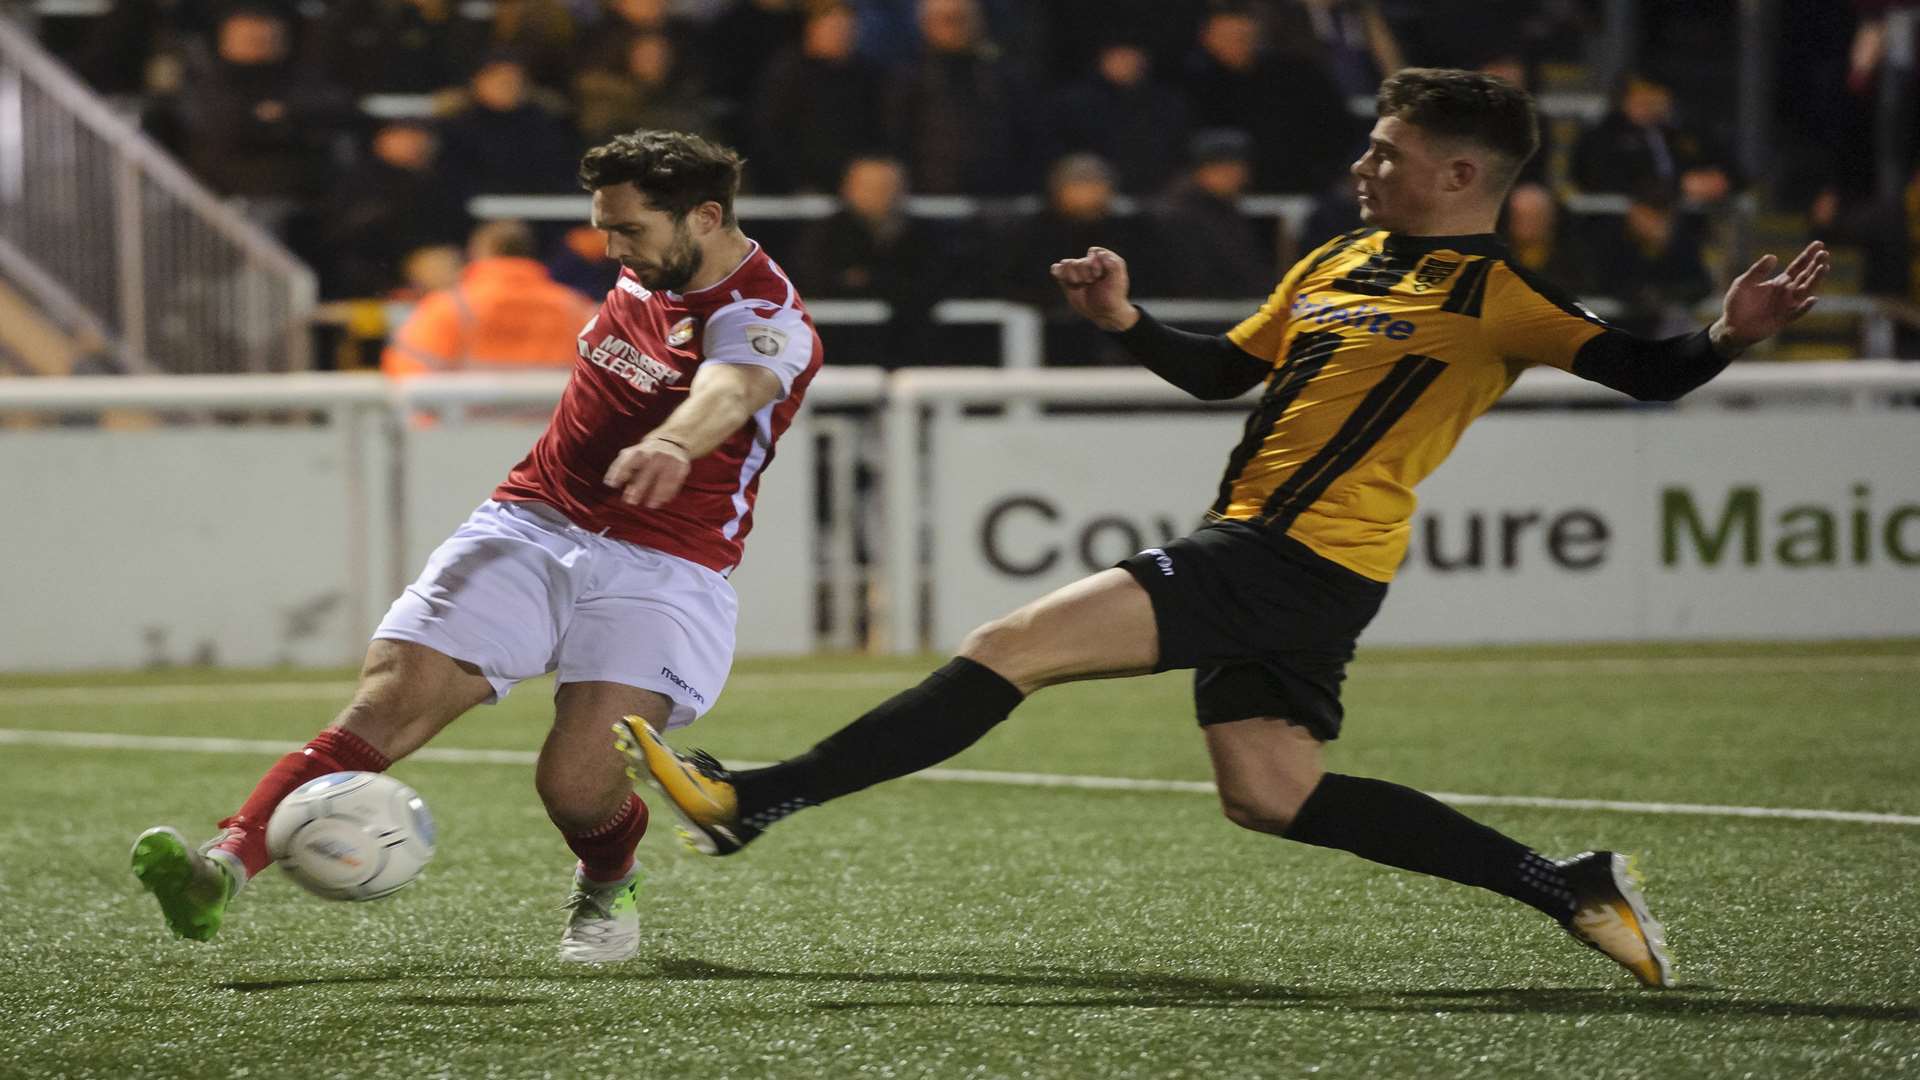 Dean Rance clears the ball during Ebbsfleet's win at Maidstone Picture: Andy Payton